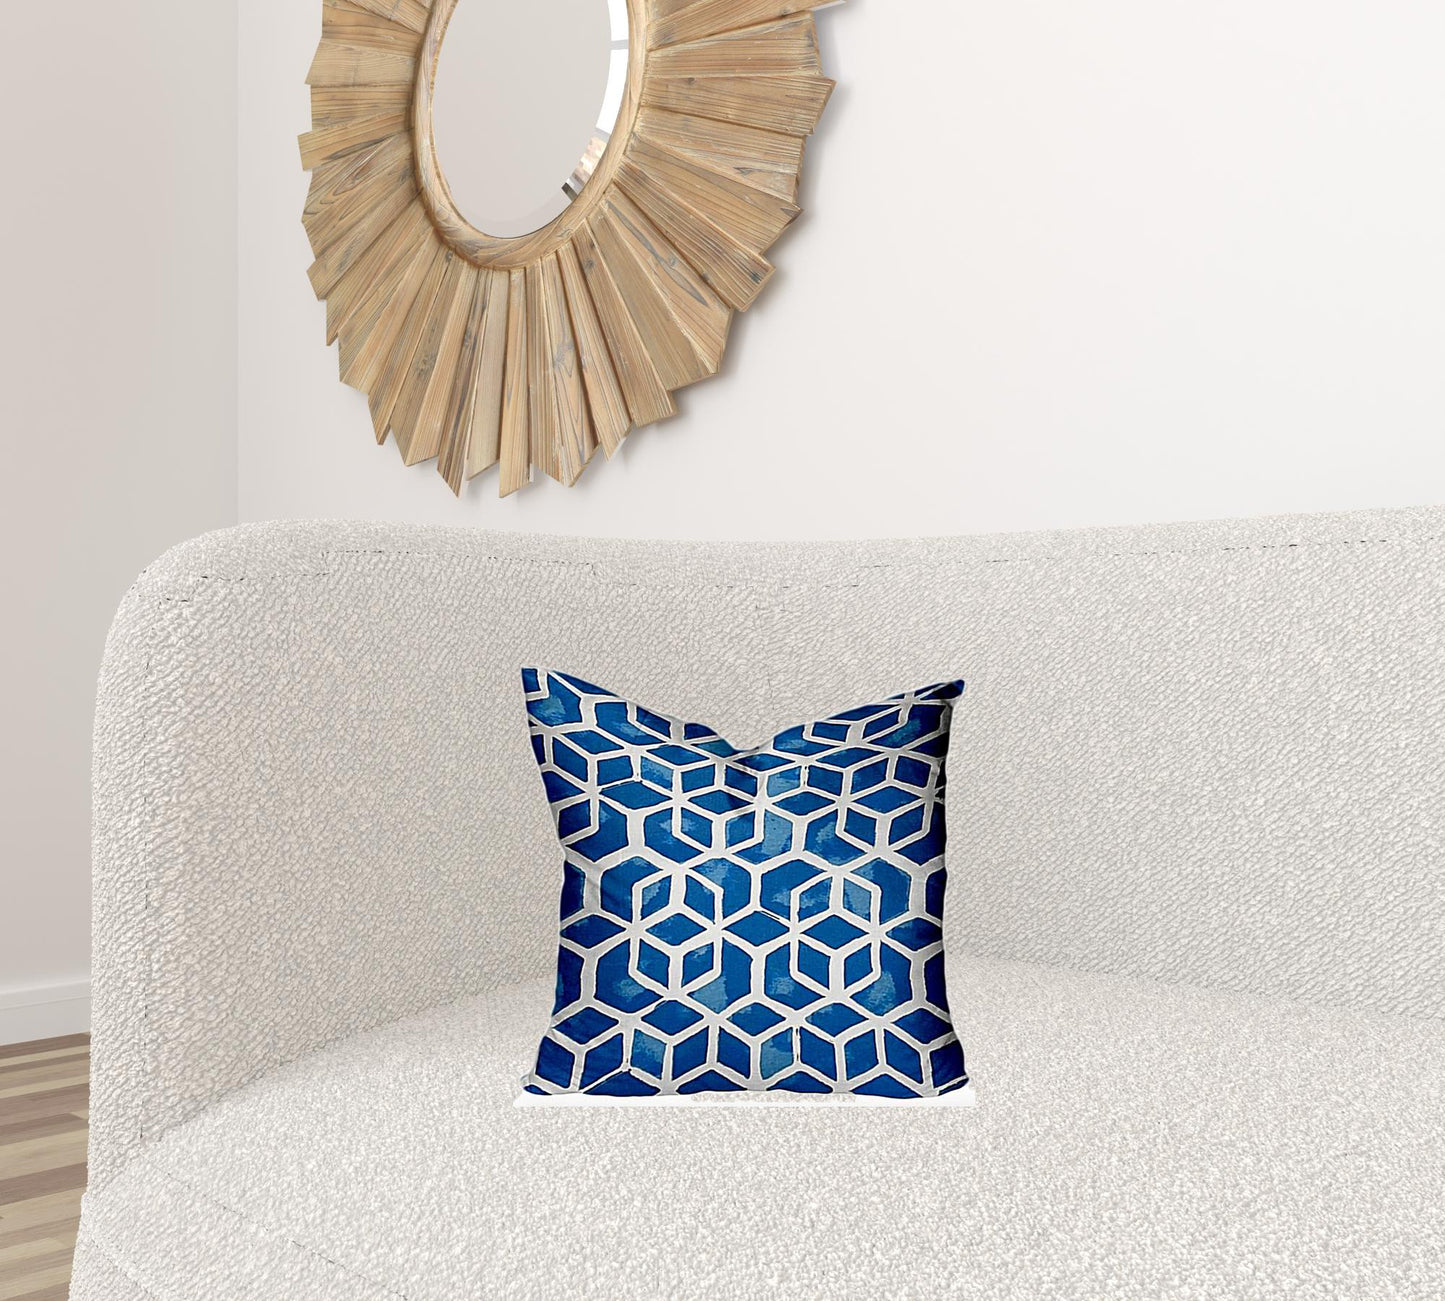 16" X 16" Blue And White Blown Seam Geometric Throw Indoor Outdoor Pillow